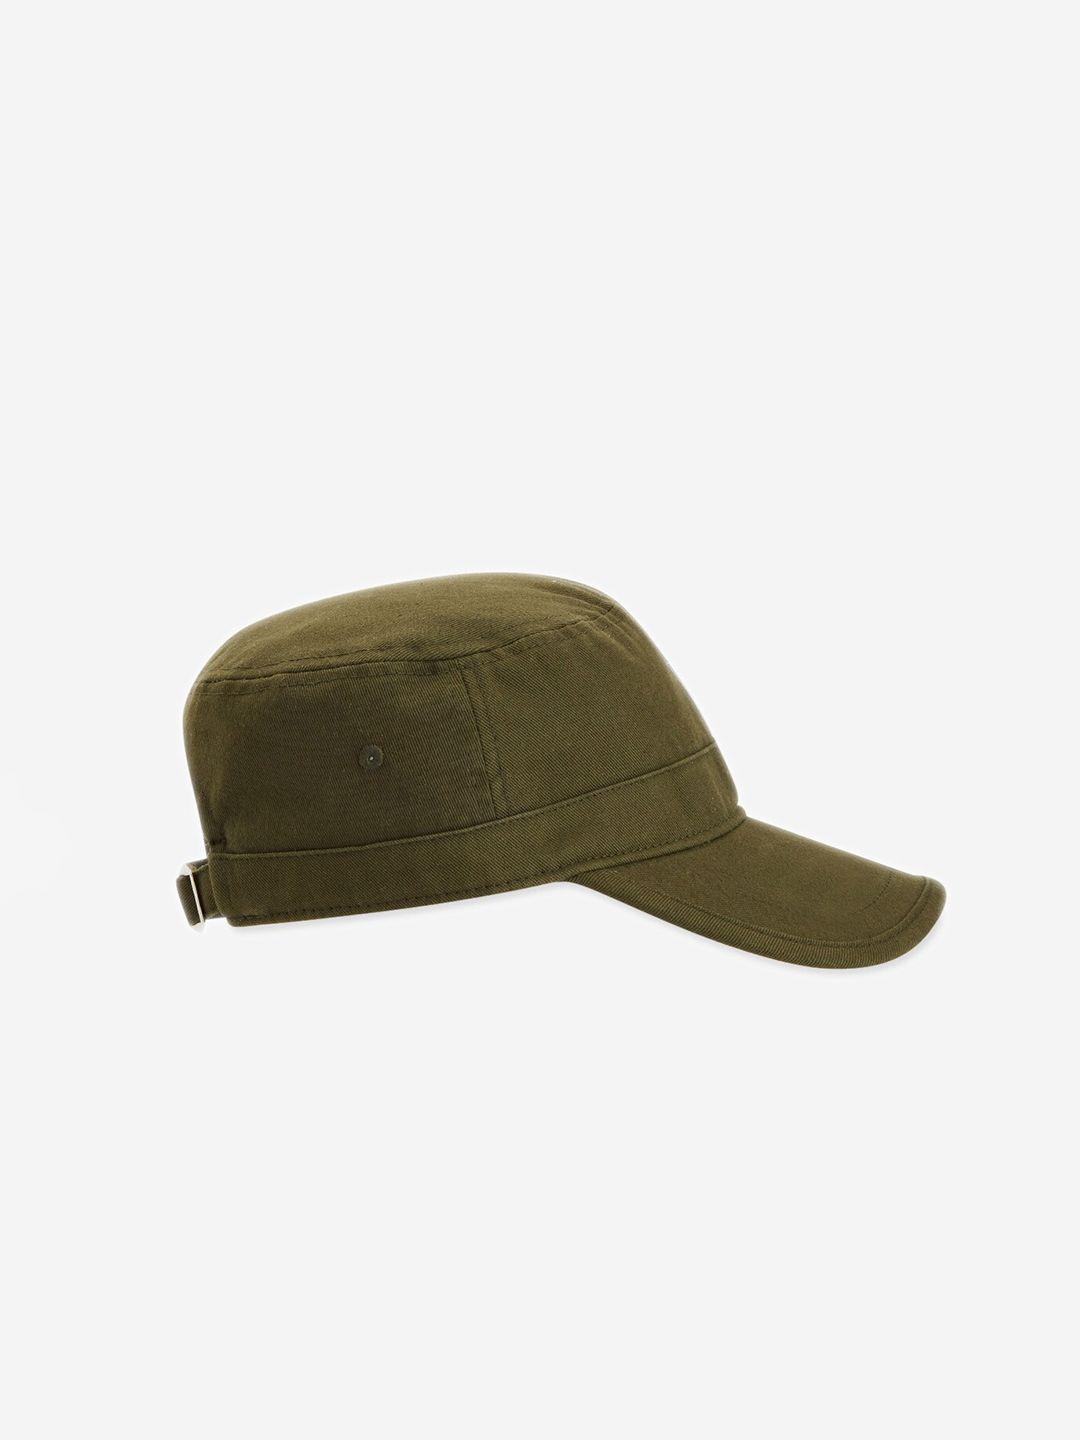 wildcraft adults olive green brand logo embroidered cotton baseball cap